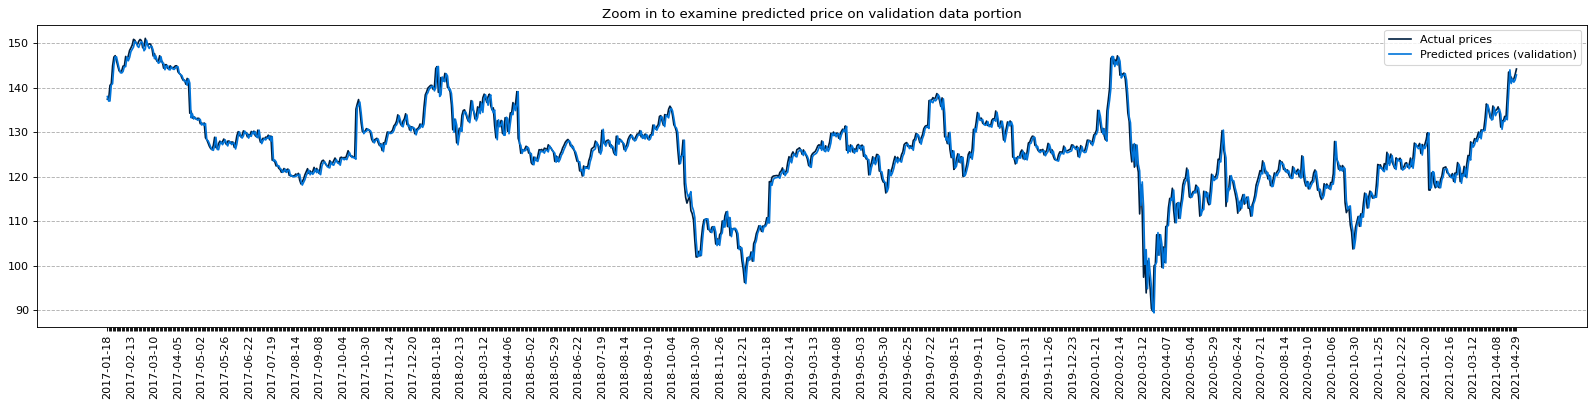 predicted validation zoom in